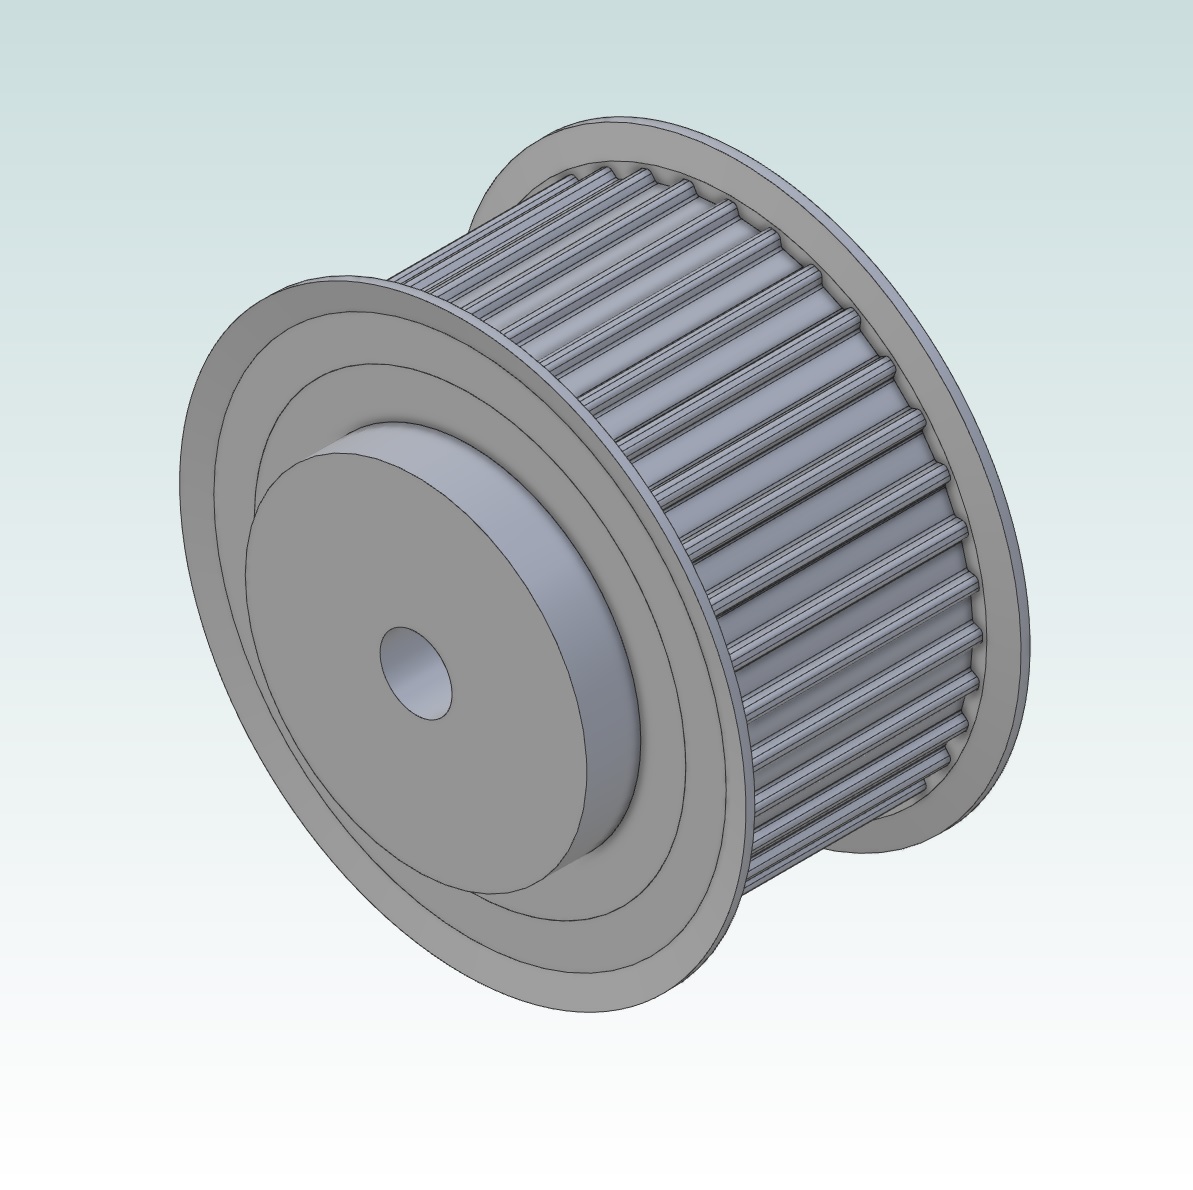 64221 at5 pulley 36at5 z36 for 25mm wide belts 3d render